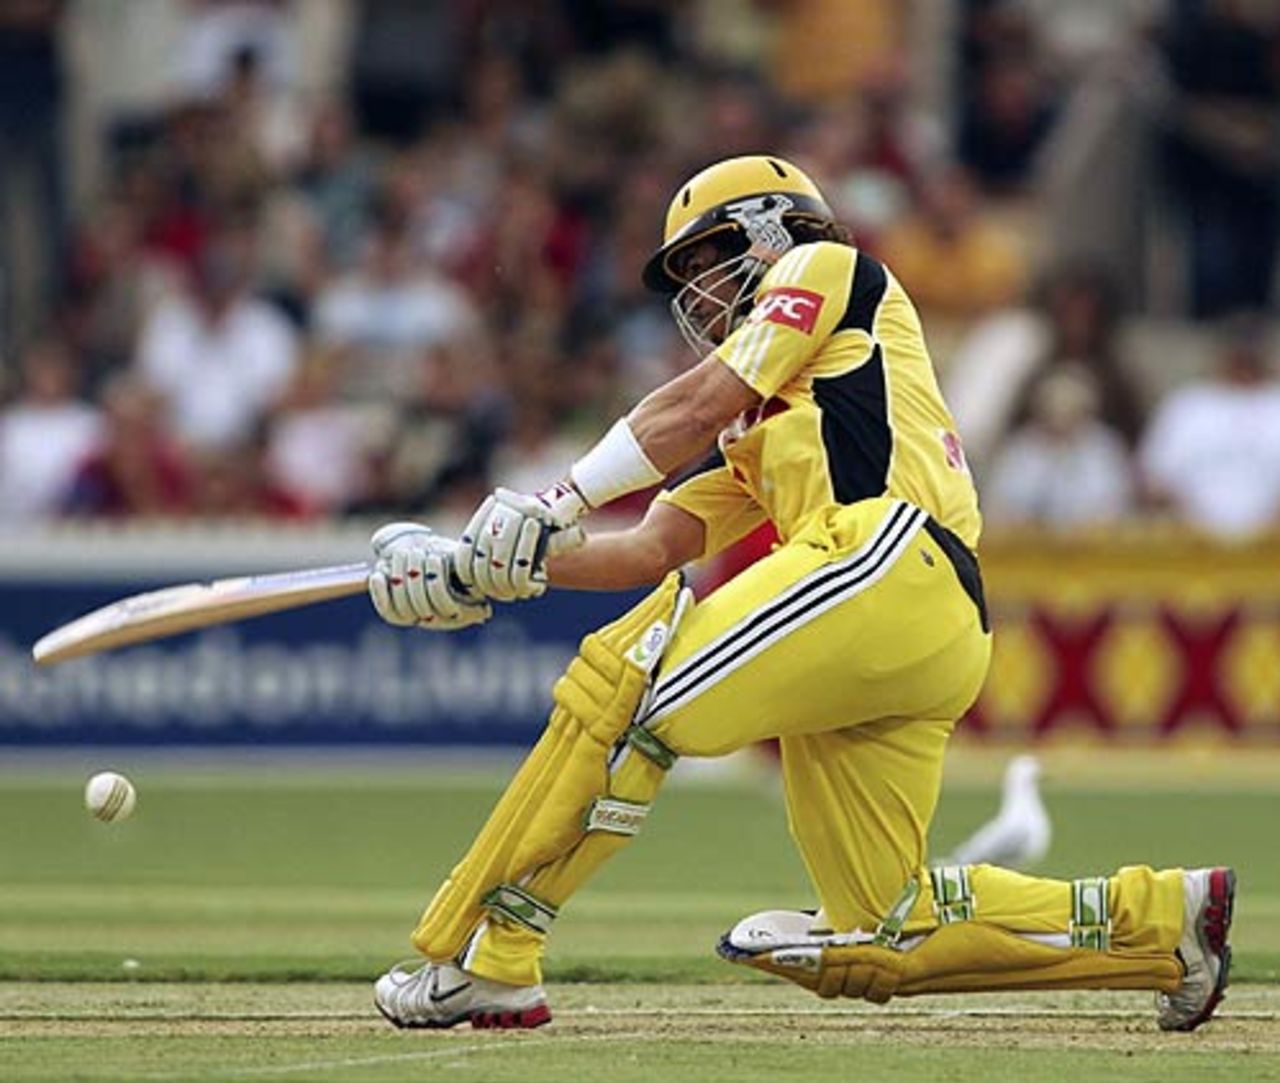 Ryan Campbell during his innings of 55 against South Australia, South Australia v Western Australia, Australian Twenty20 Competition, Group A, Adelaide, January 10, 2006